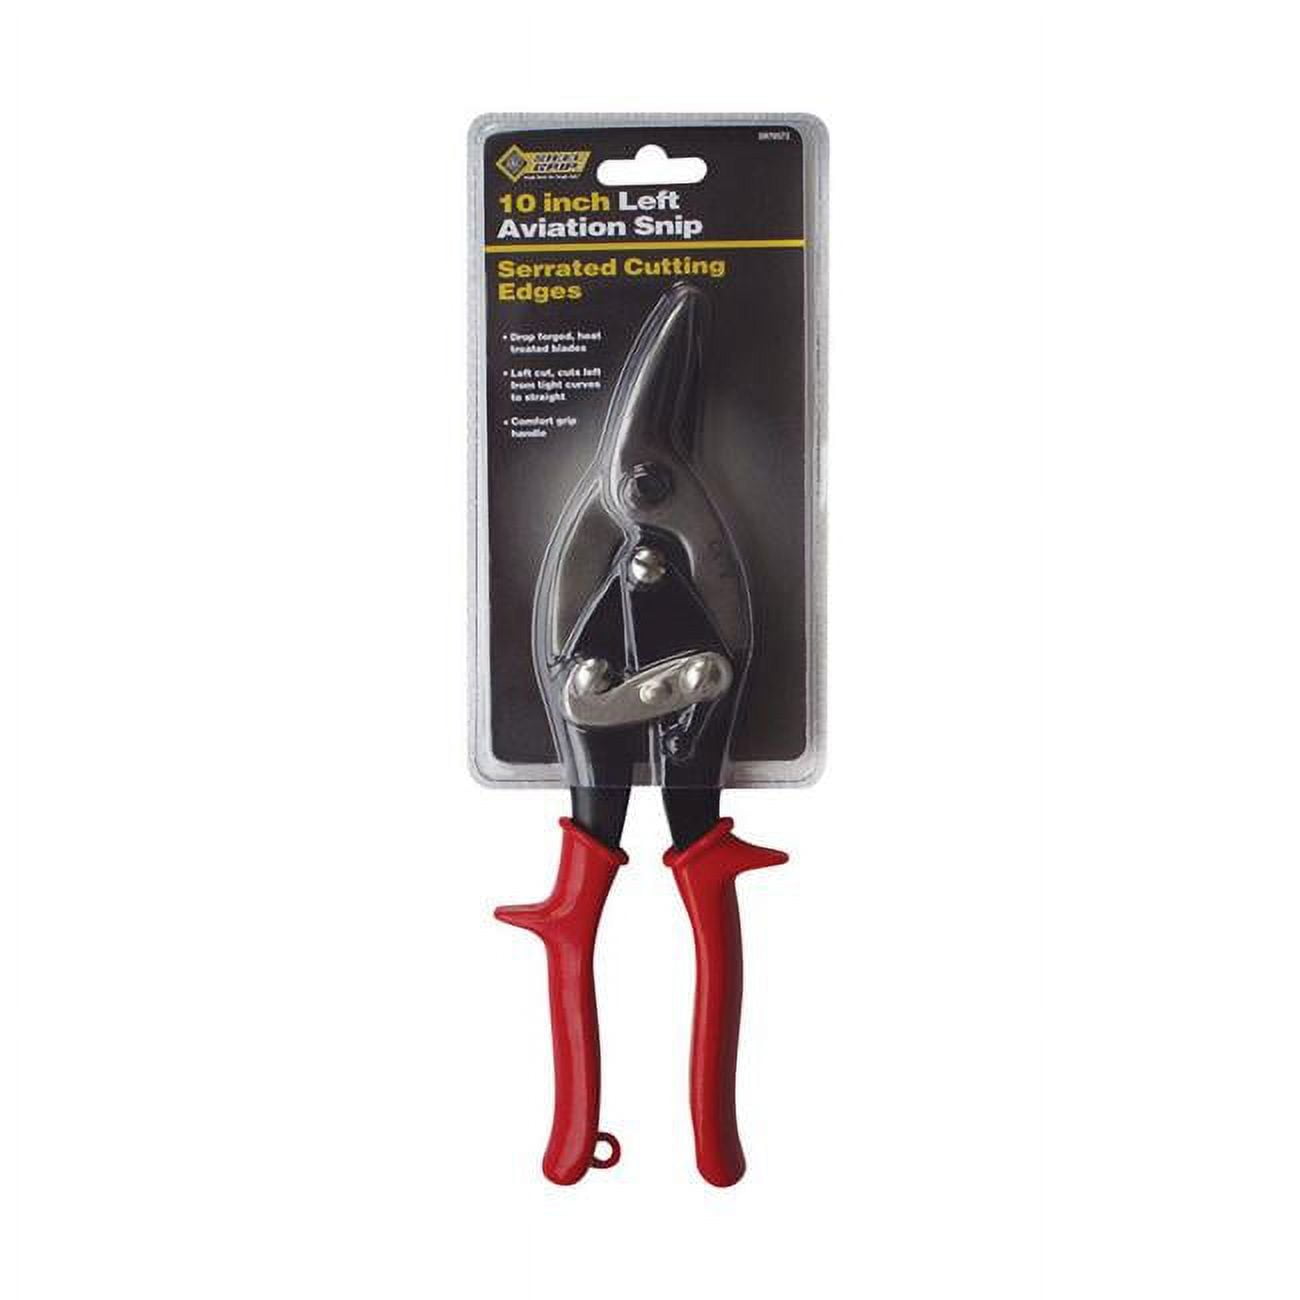 2796589 10 In. Chrome Alloy Steel Left Serrated Aviation Snips, Red